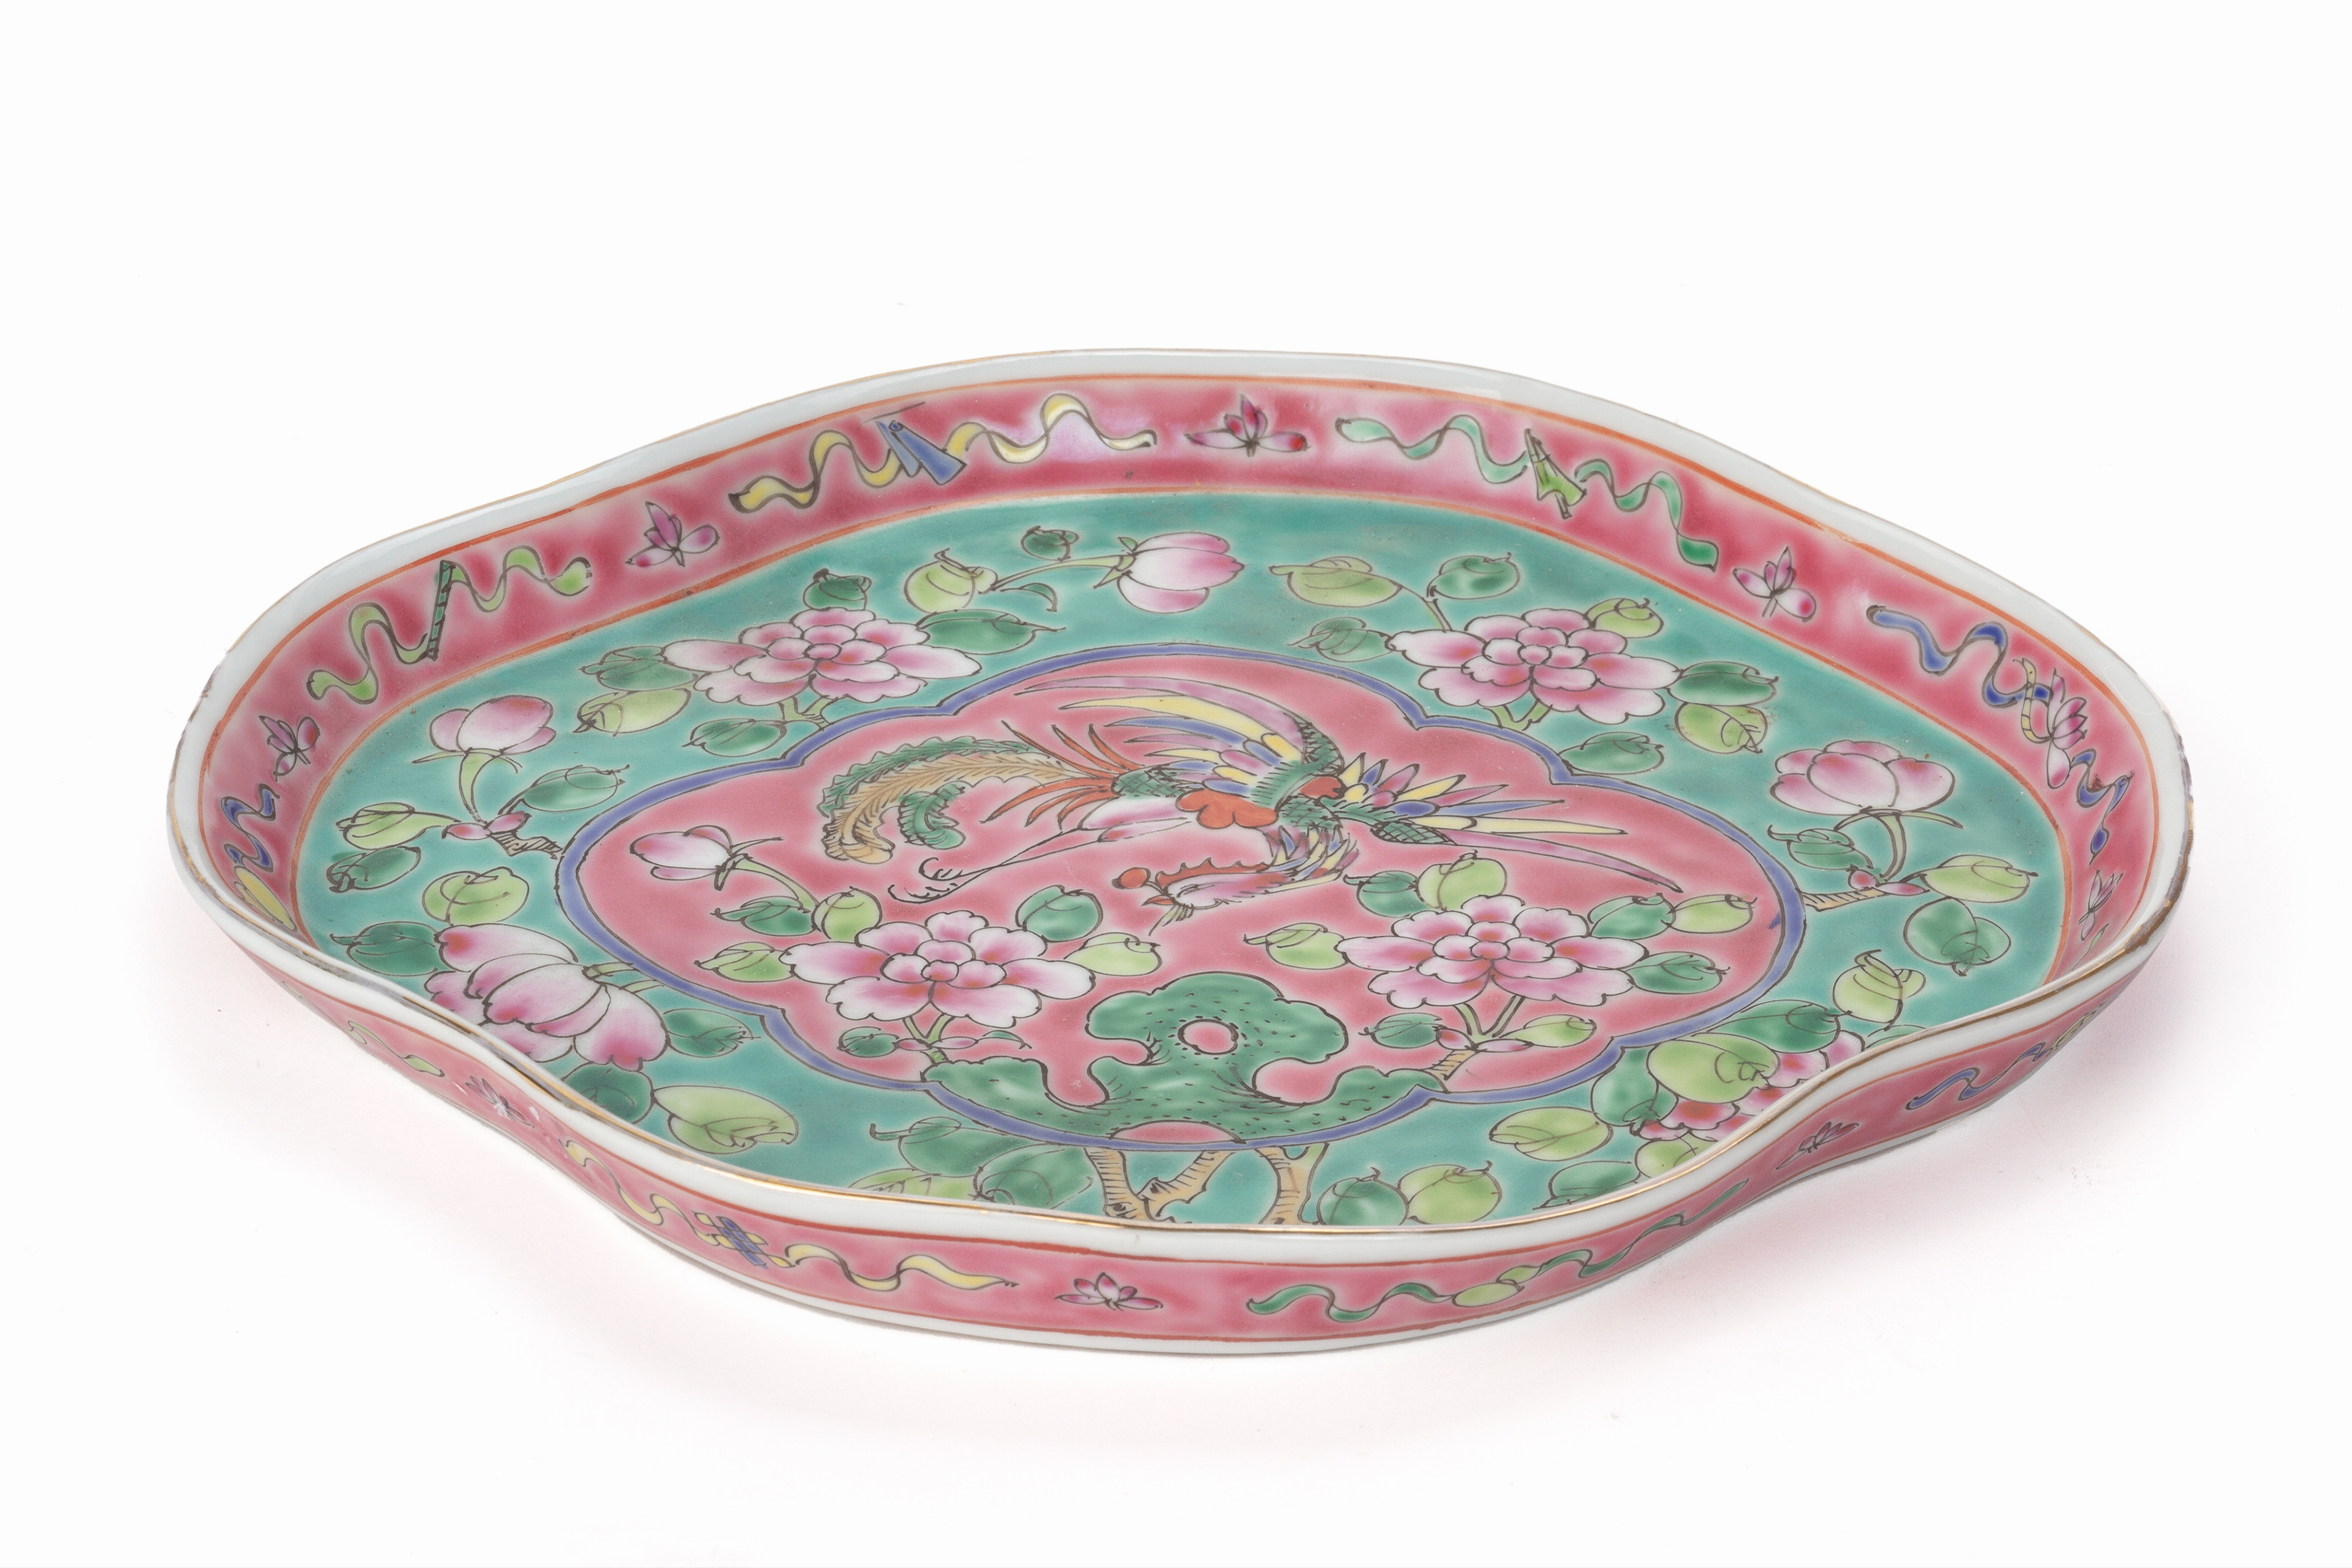 A PAIR OF TURQUOISE GROUND MODERN PERANAKAN STYLE TEA TRAYS - Image 3 of 3